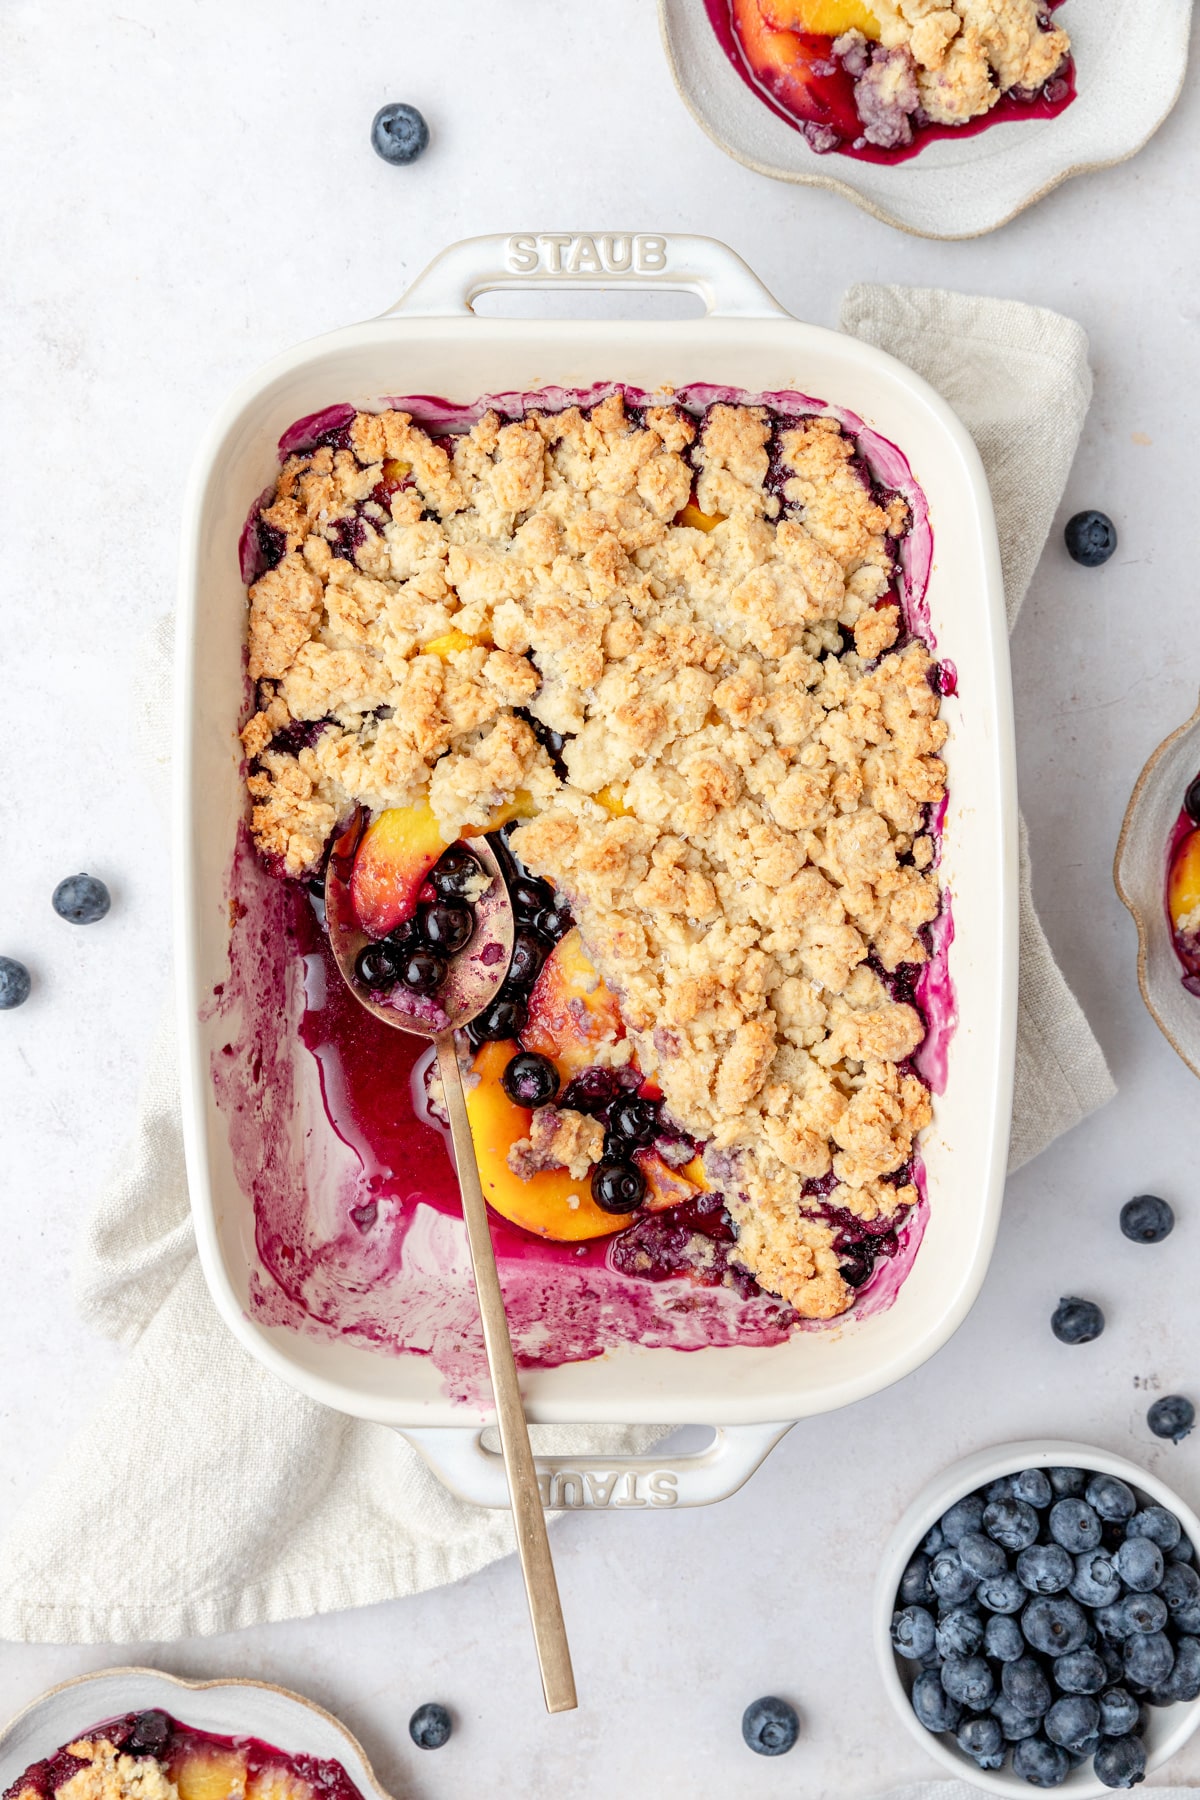 peach blueberry cobbler with crumbly biscuit topping.